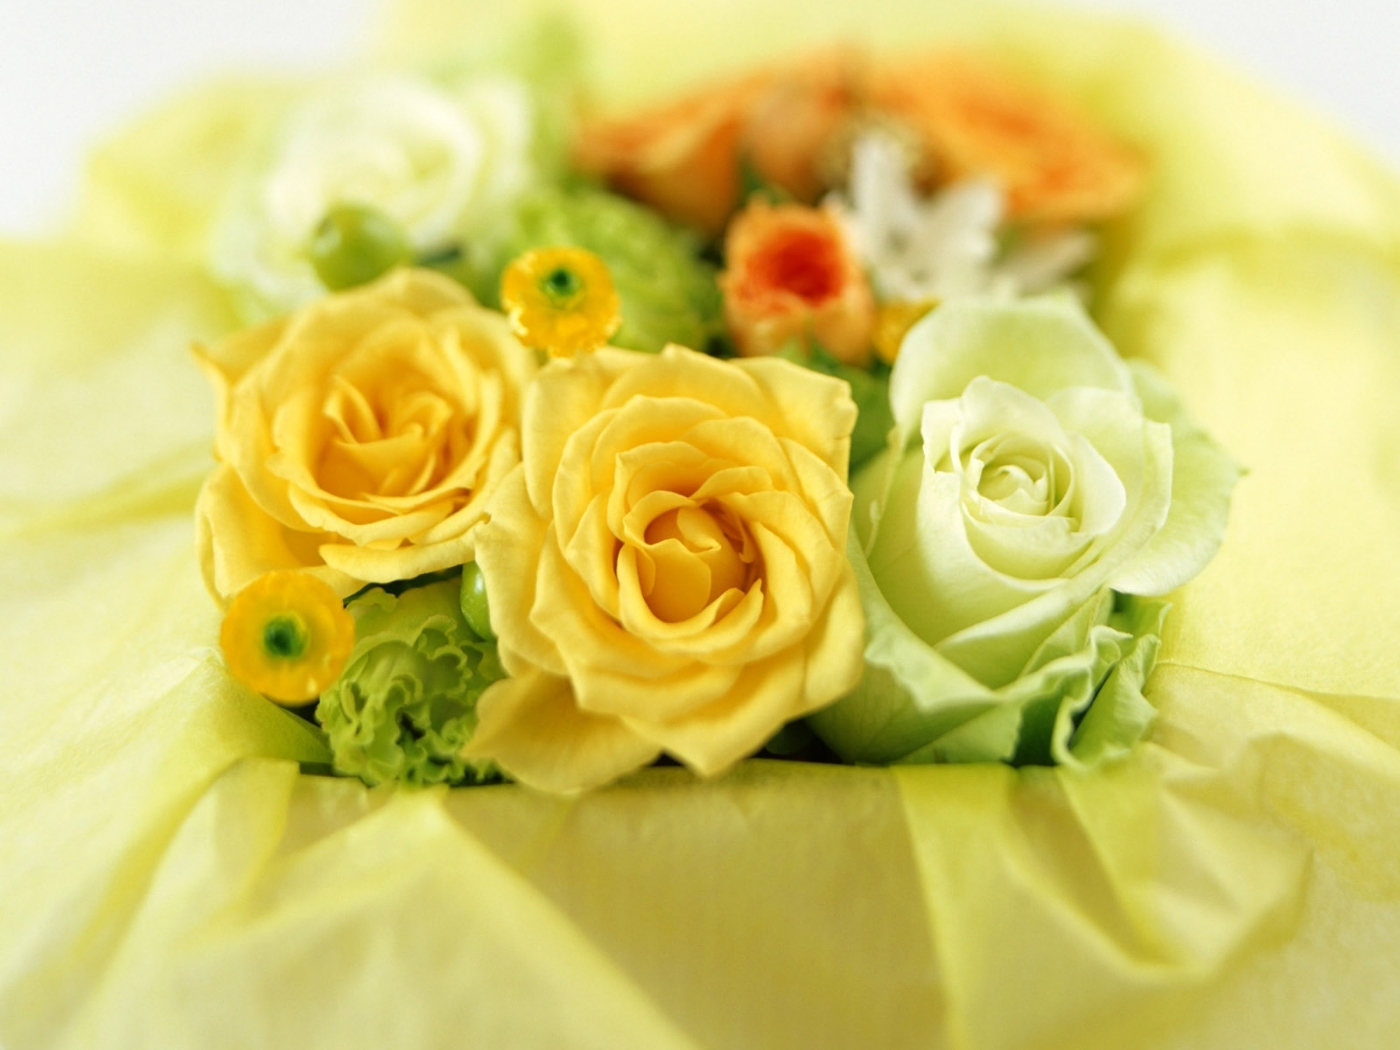 Phone Wallpaper (No watermarks) yellow, flowers, plants, roses